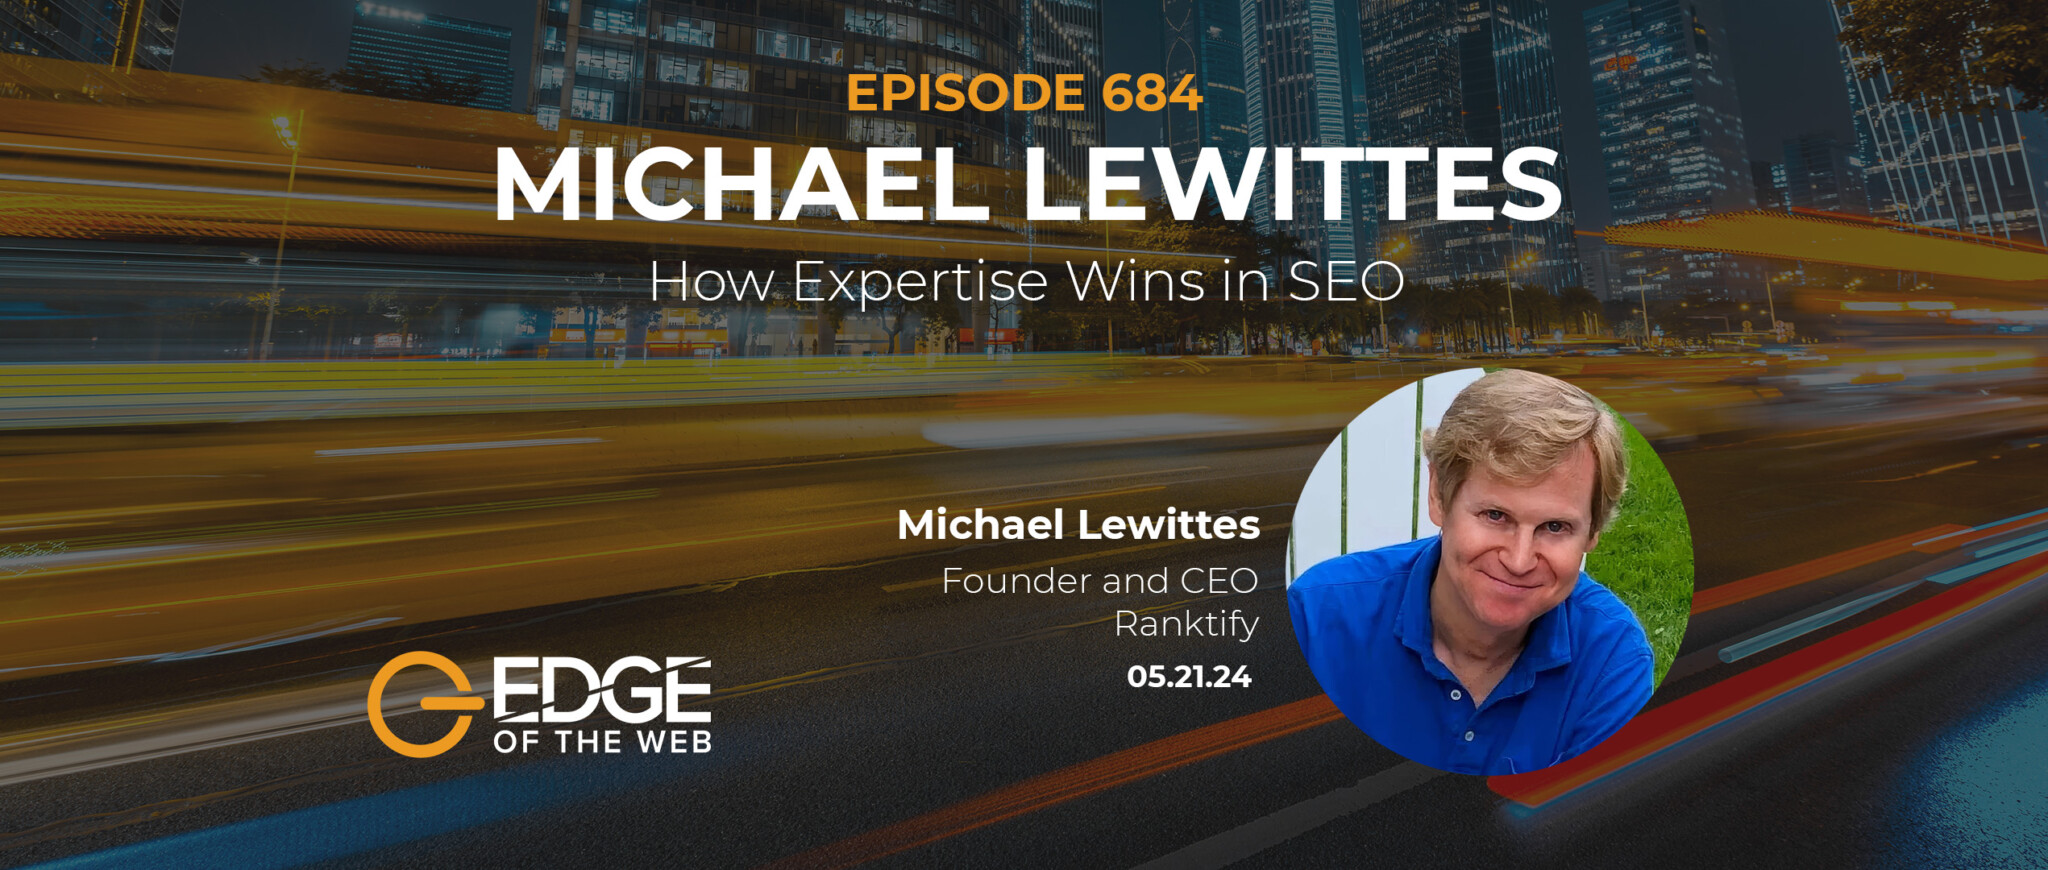 Episode 684: How Expertise Wins in SEO with Michael Lewittes